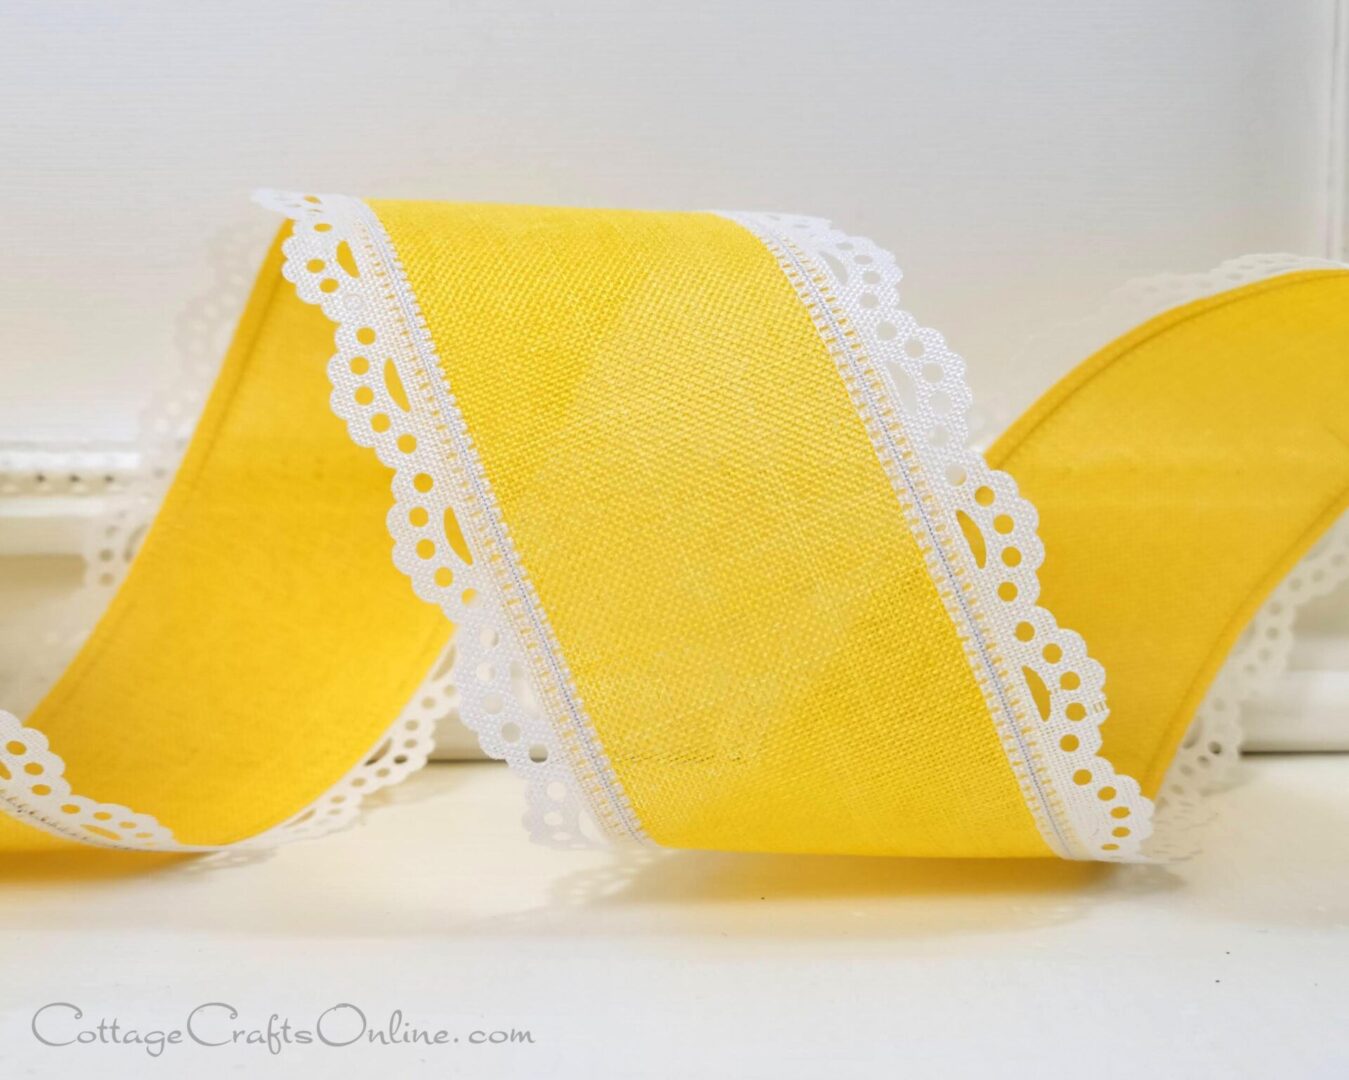 A yellow ribbon with white lace trim on it.